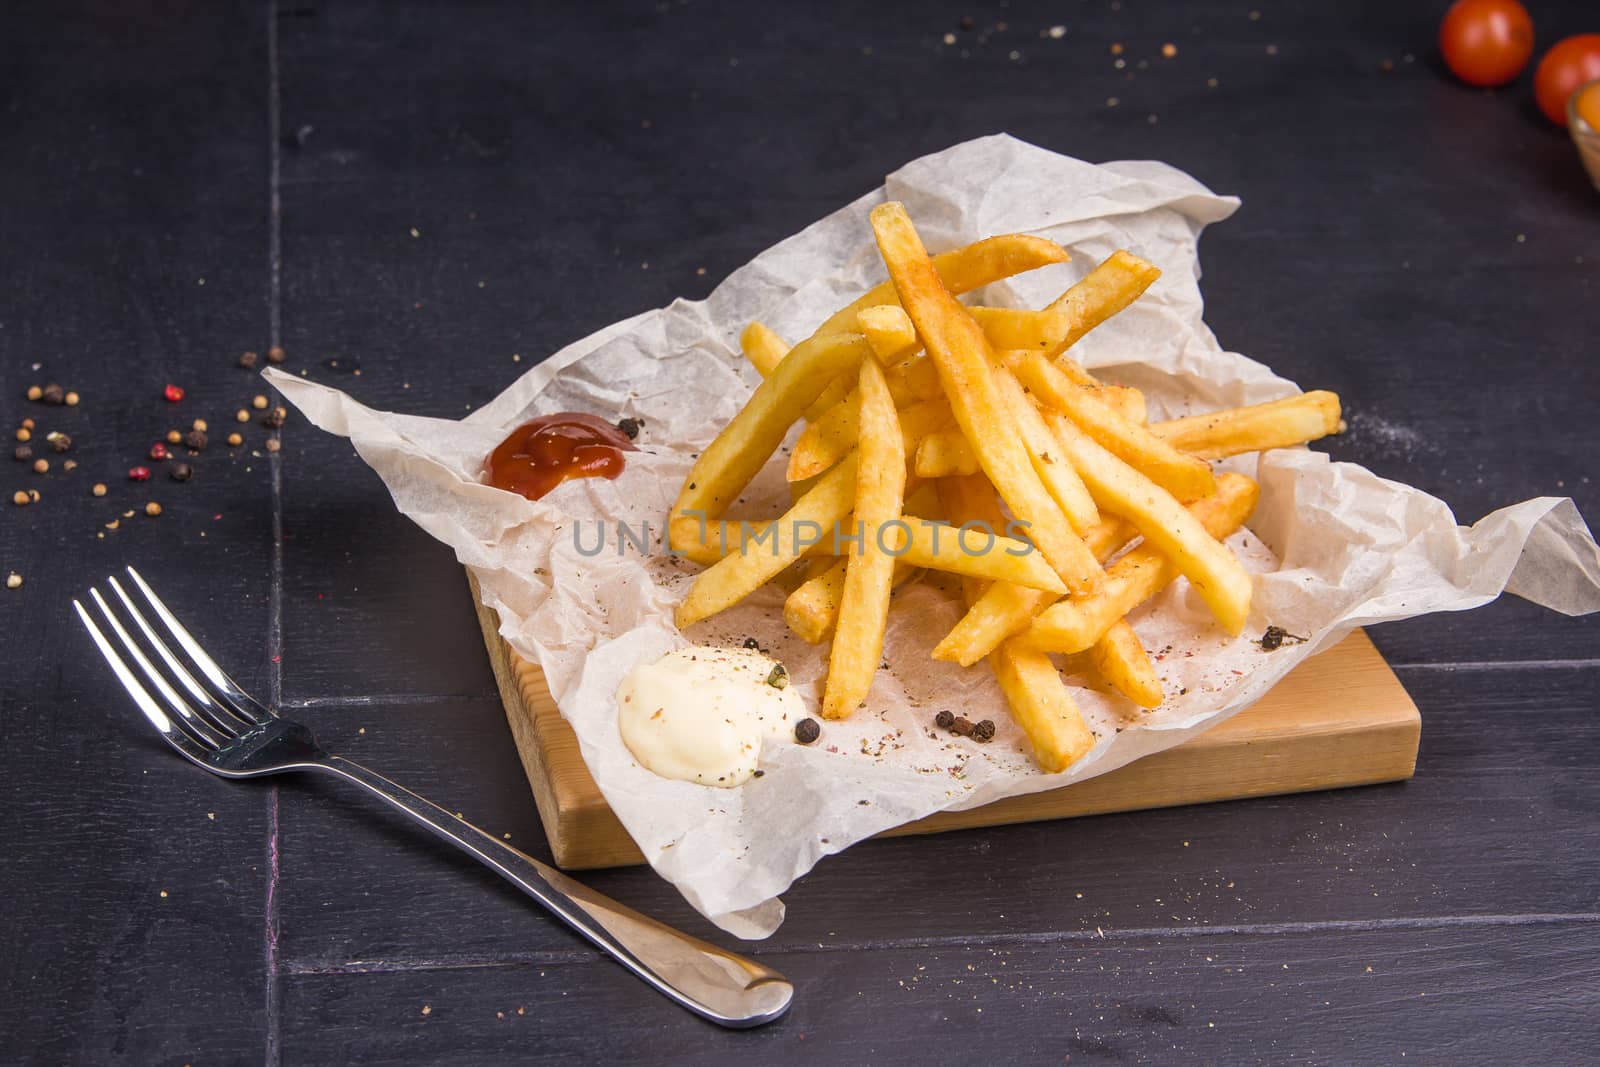 Homemade fries on a table with ingredients and cutlery around. Concept: healthy food, diet, fastfood. 